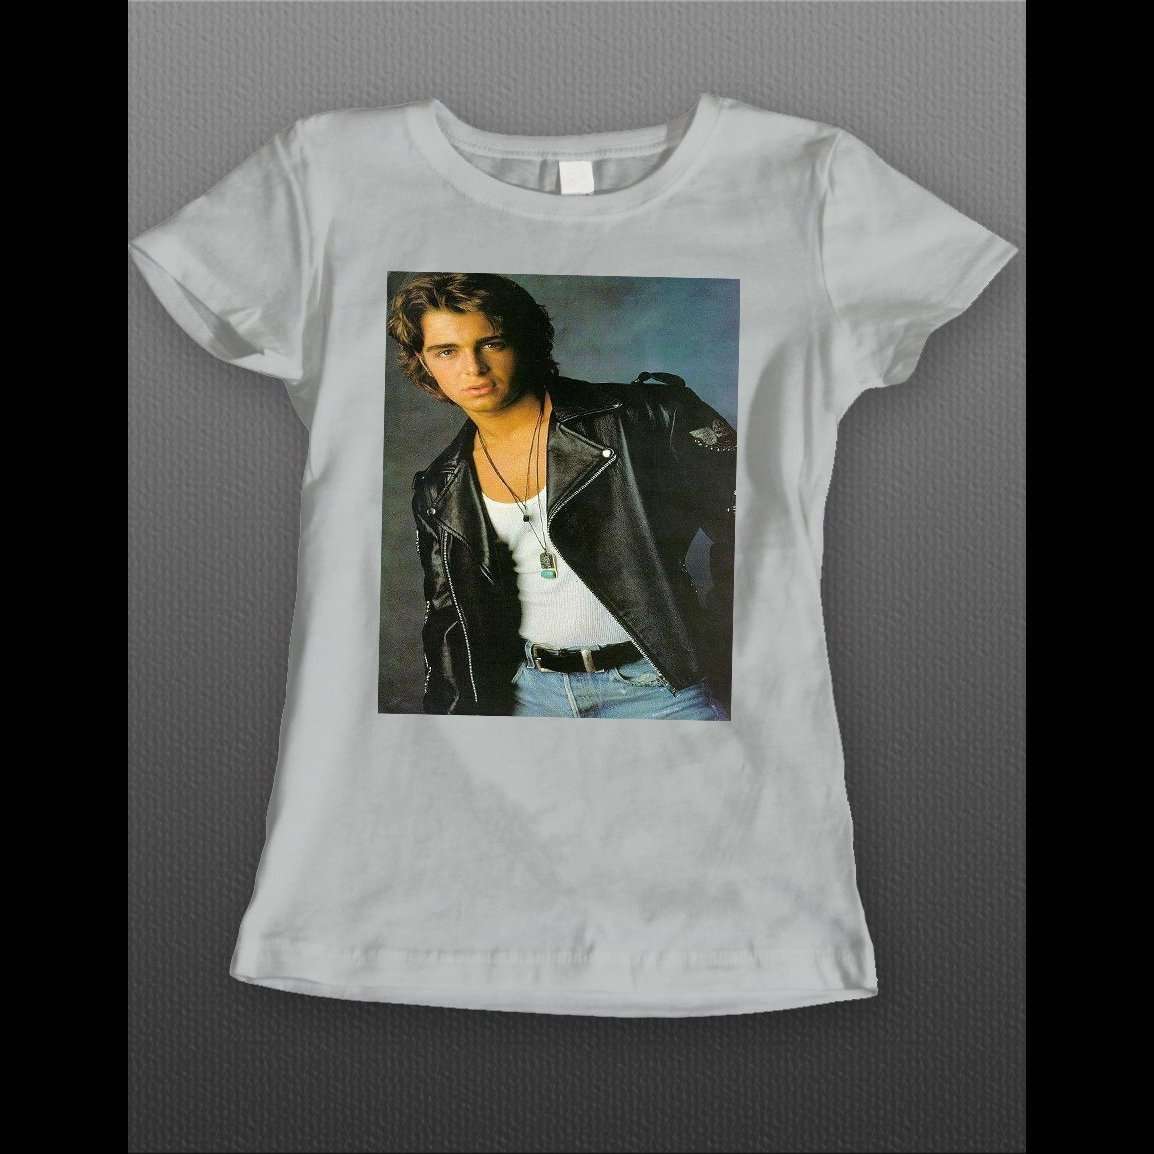 80'S HEART THROB JOEY LAWRENCE LADIES T-SHIRT | 80's, 90's to Today Quality Artistic ...